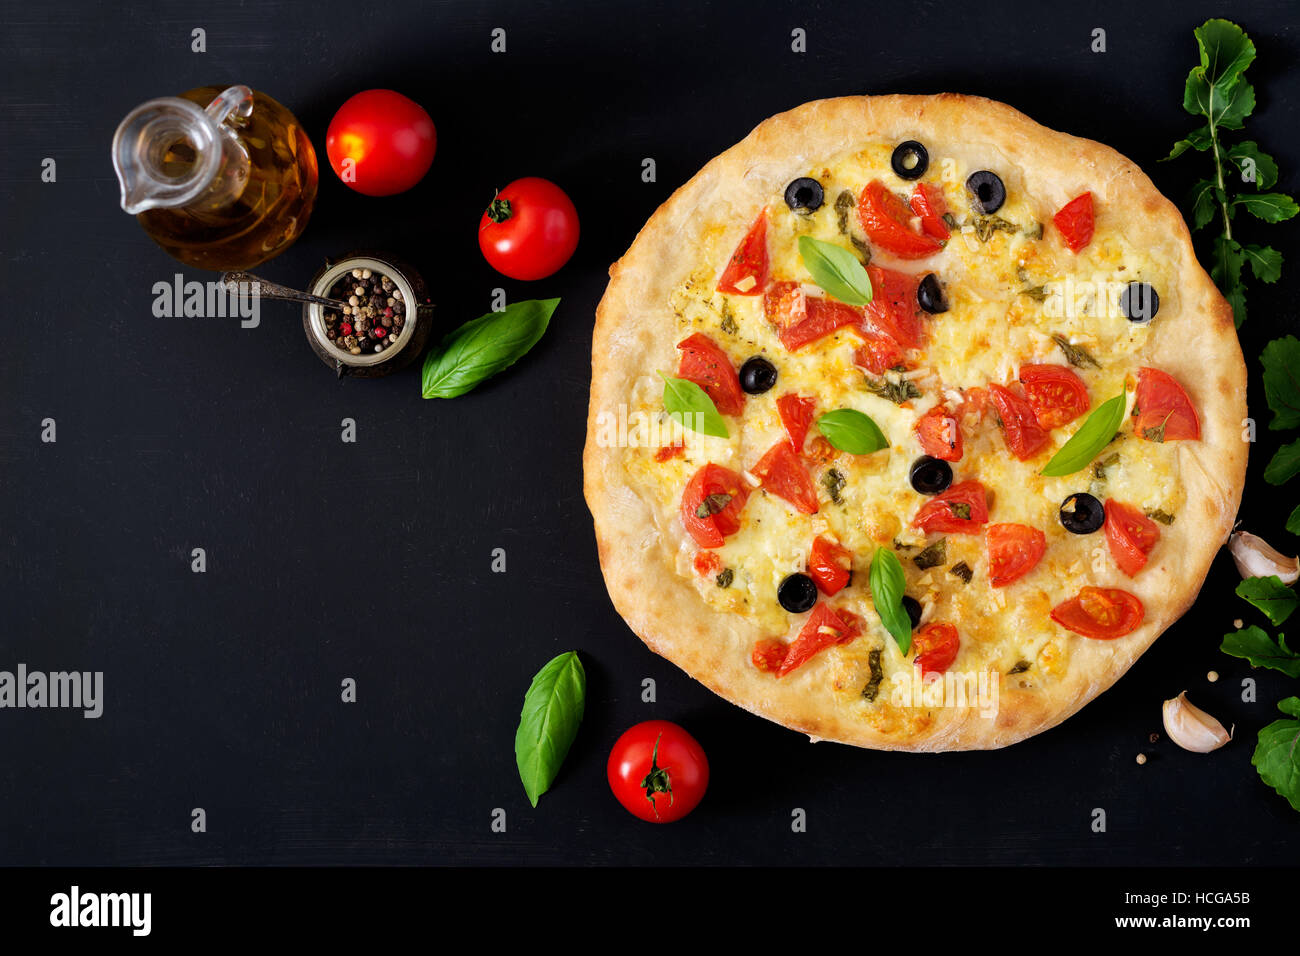 Pizza with tomato, mozzarella, basil and olives. Top view Stock Photo